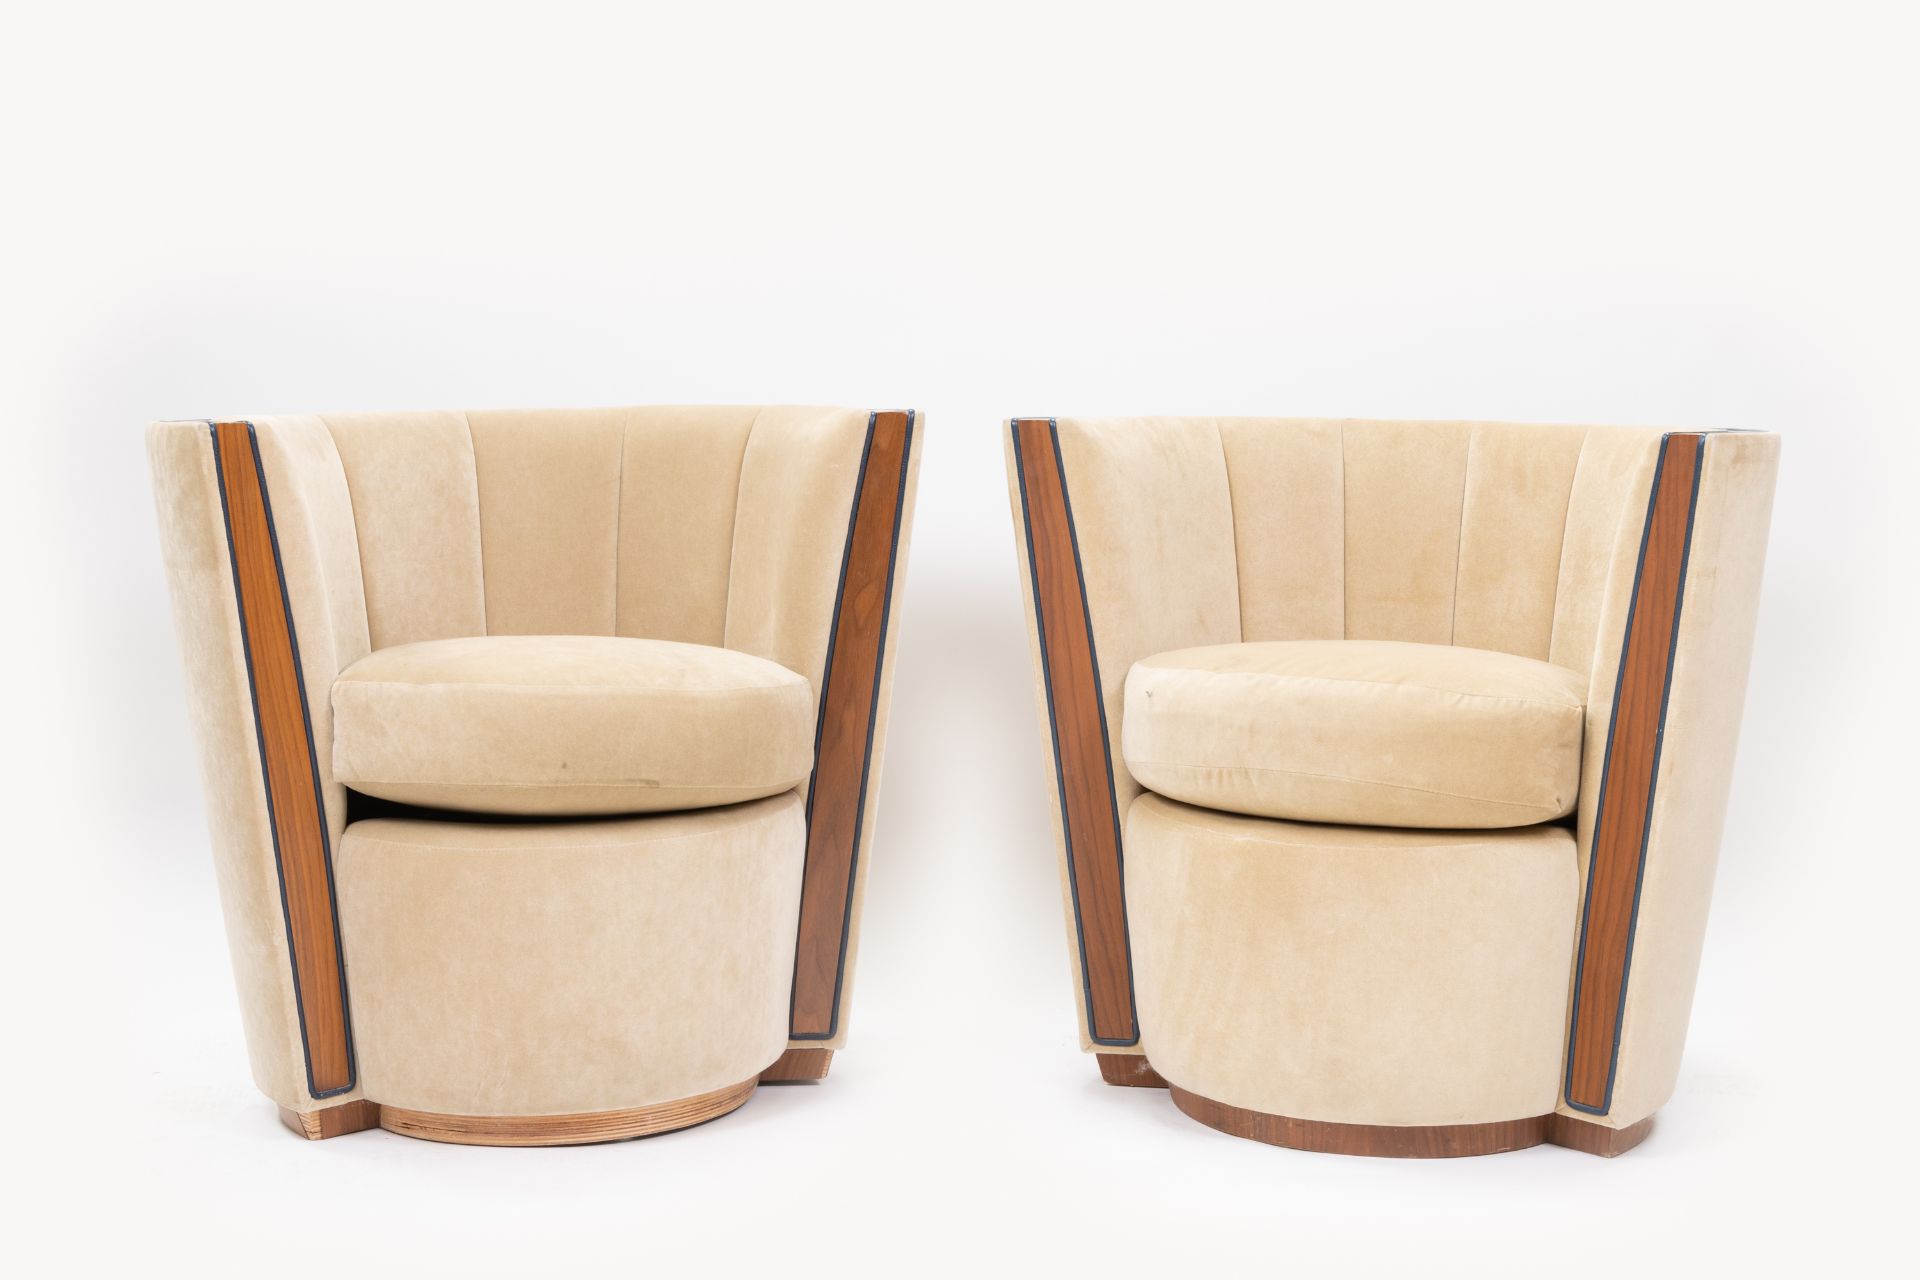 Pair of Bespoke Deco Tub Chairs Made for Claridge's by David Linley